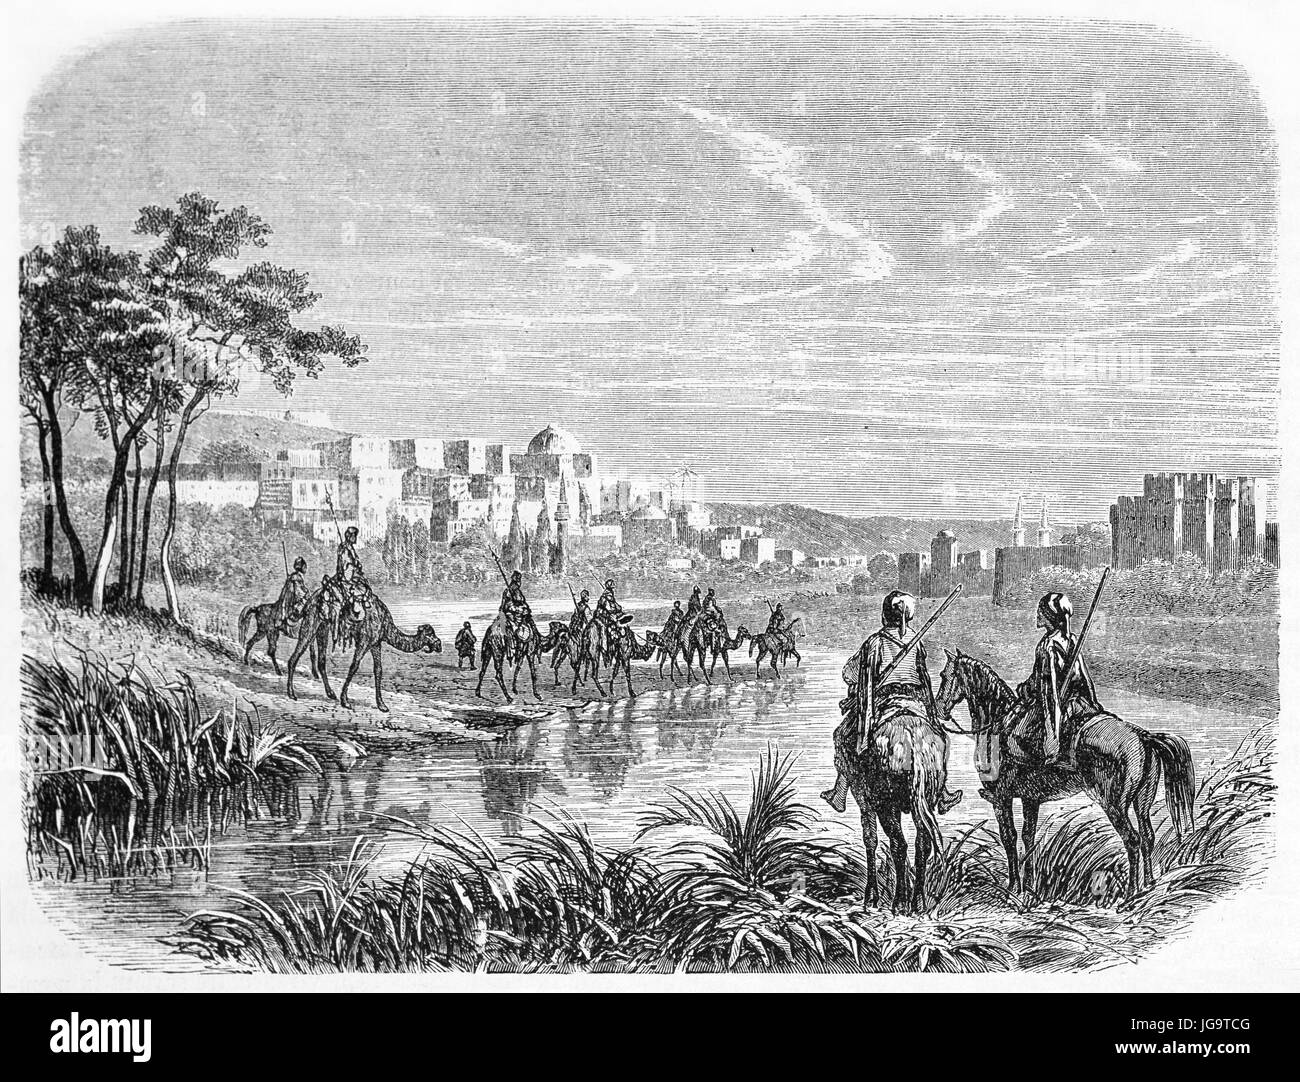 camelback and horseback people walking on a landscape towards Tripoli in the distance, Lebanon. Ancient grey tone etching style art by Grandsire 1861 Stock Photo